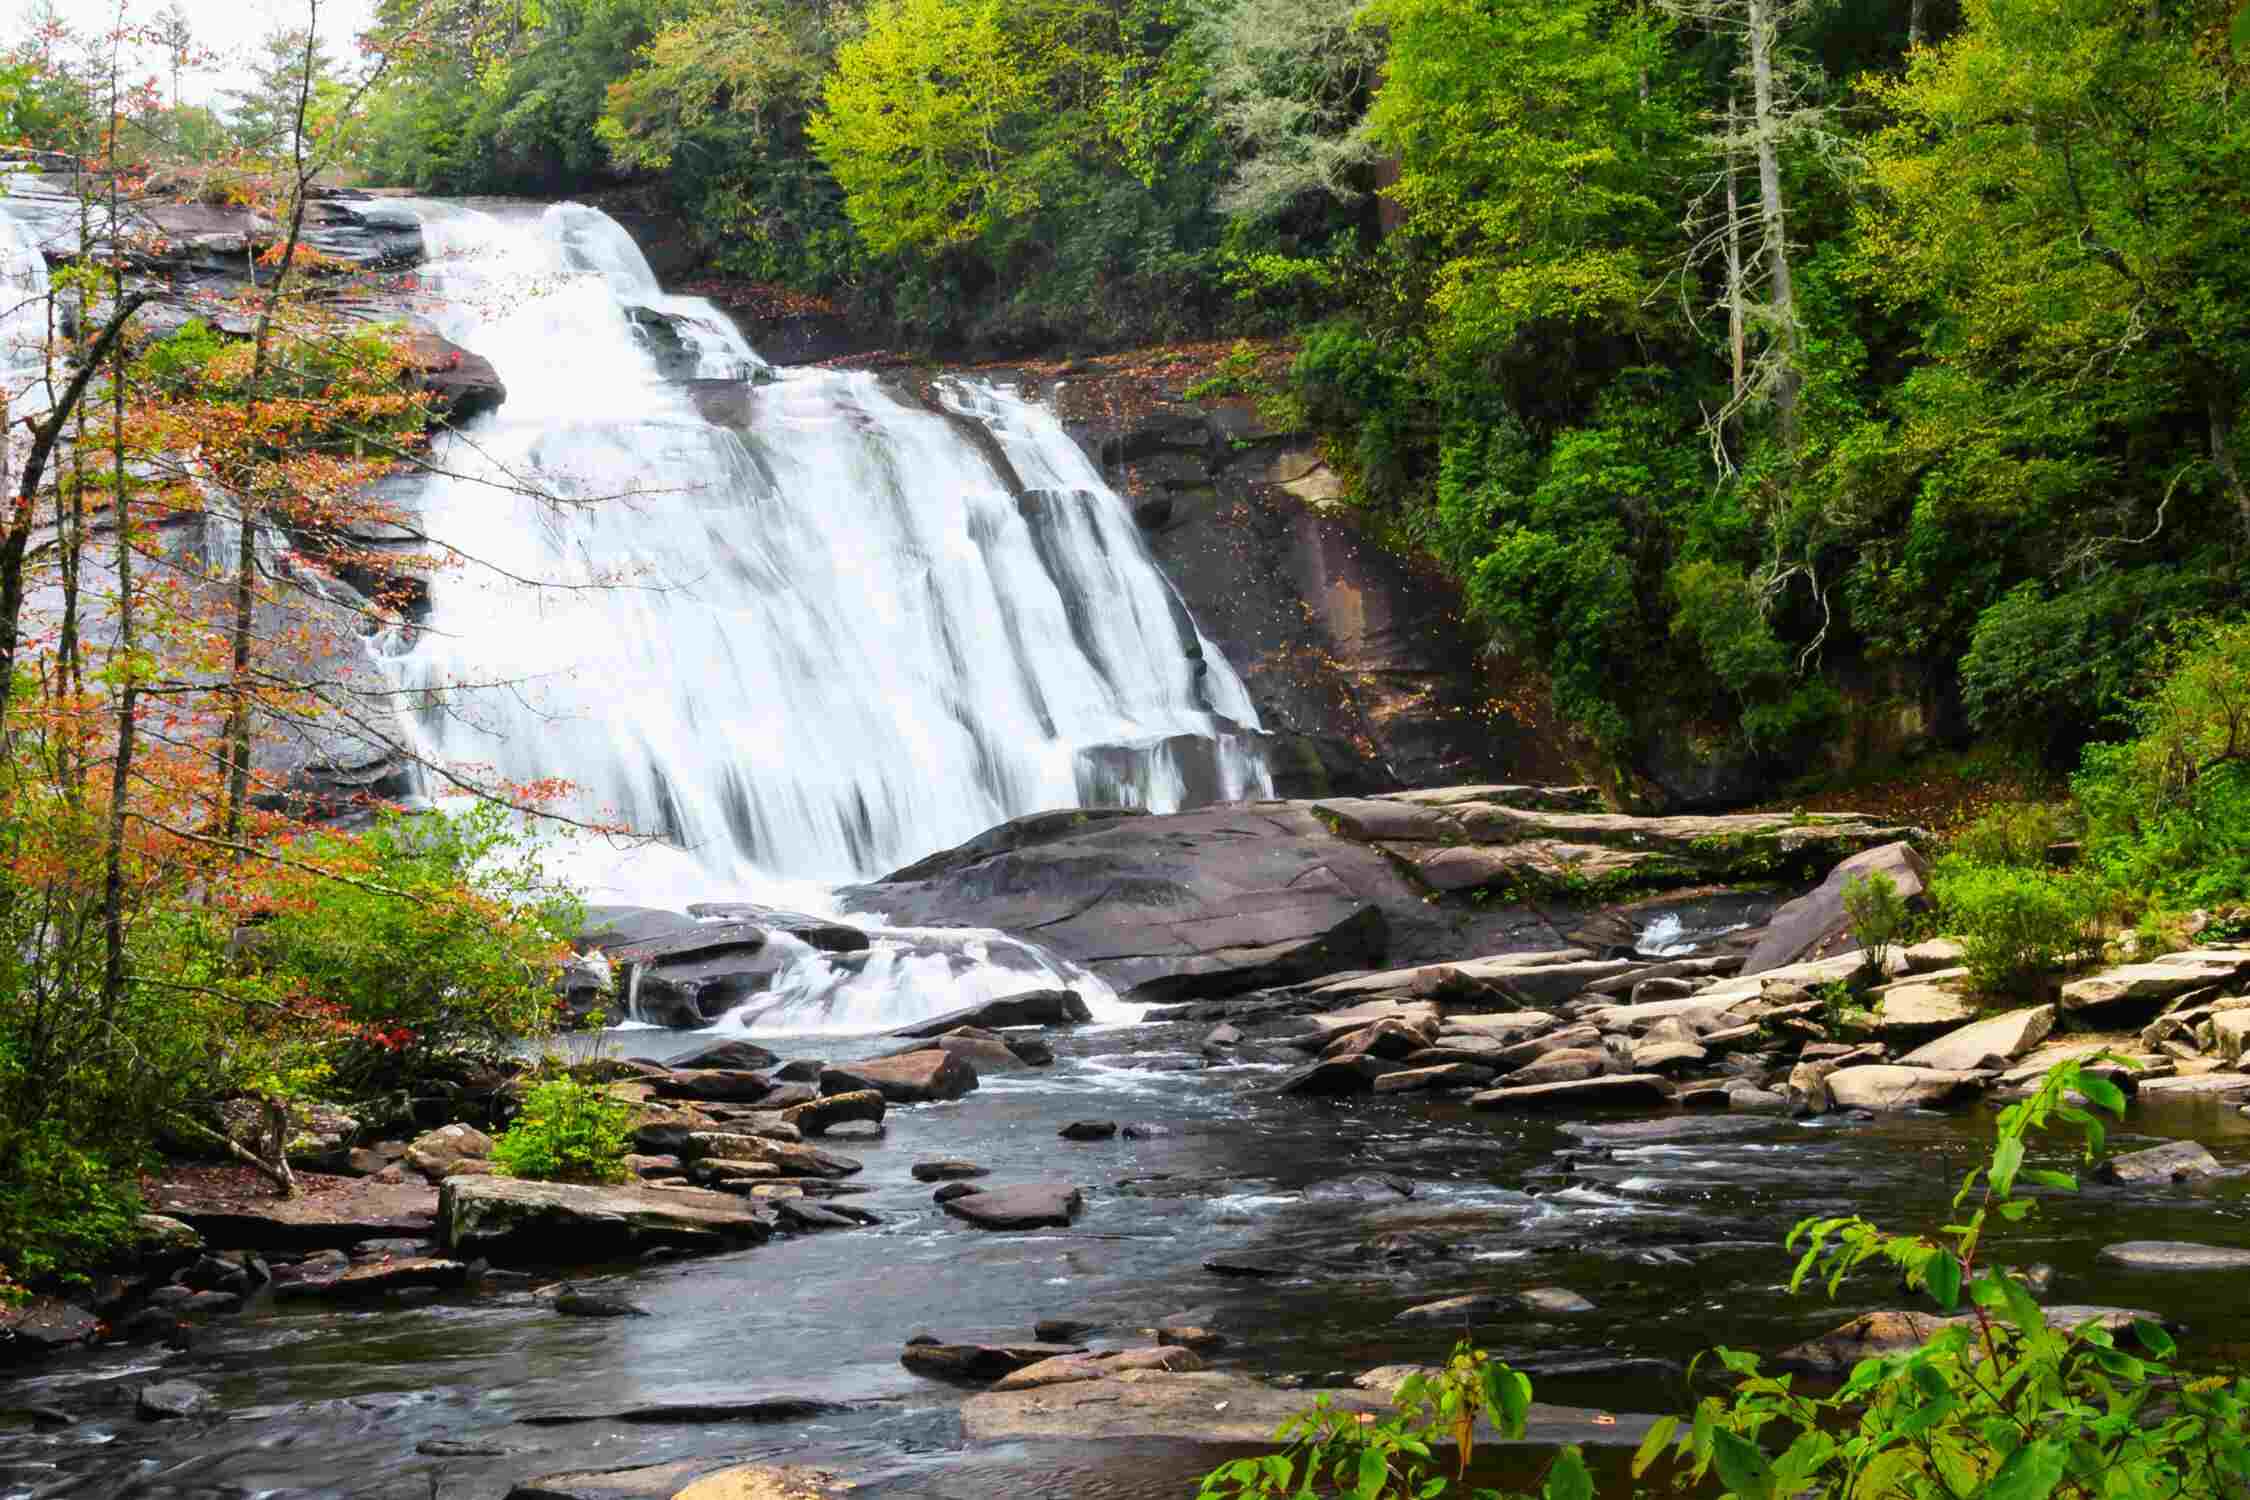 The beautiful waterfalls in DuPont State Recreational Forest